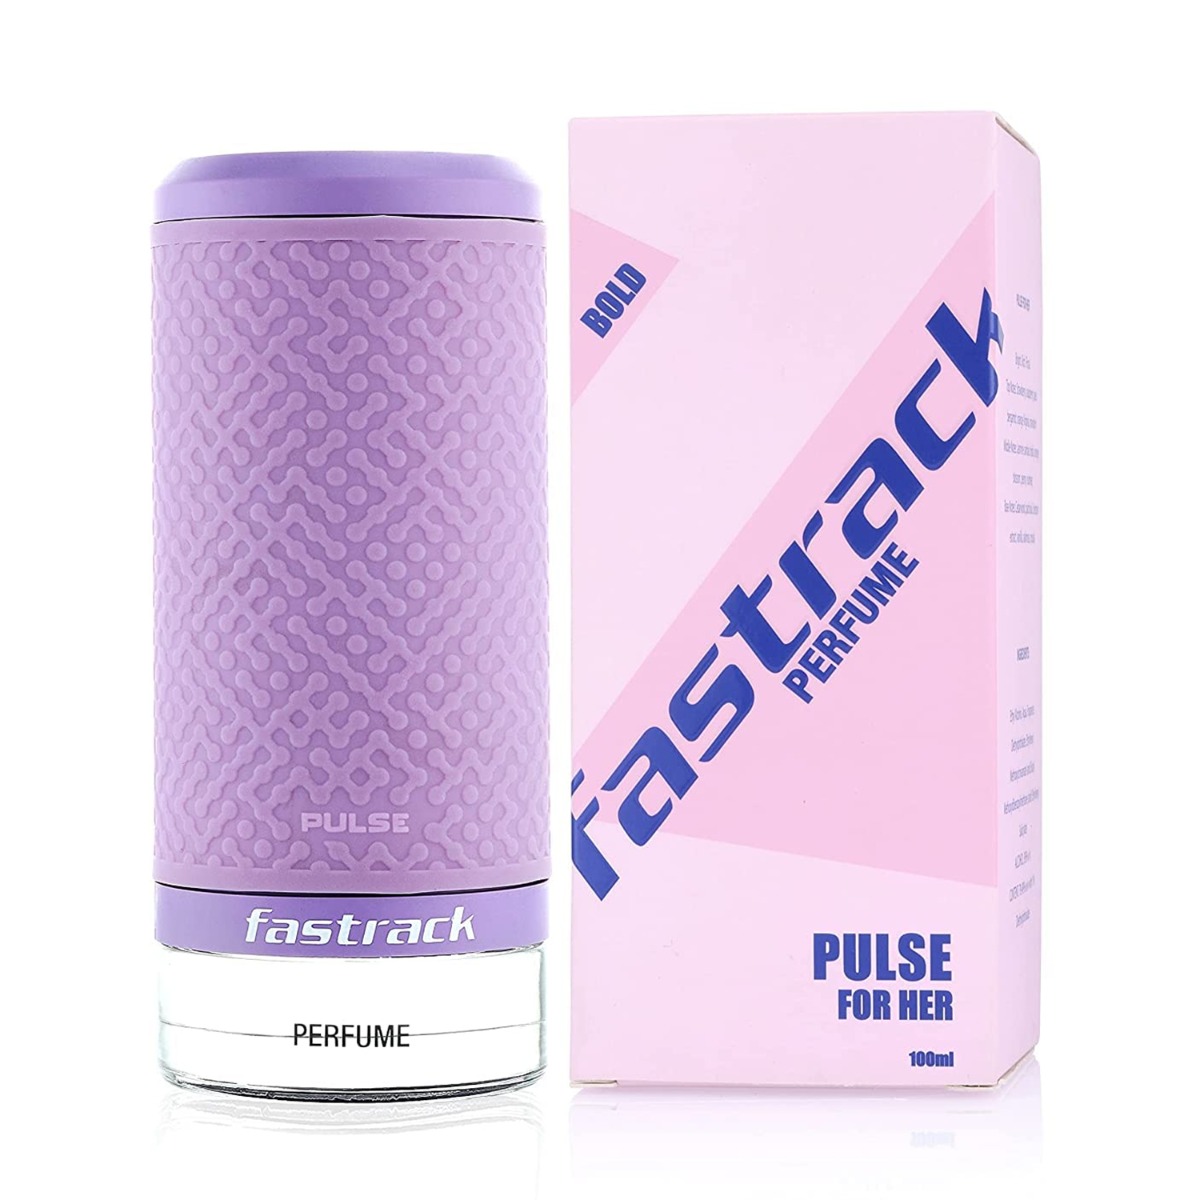 Fastrack Perfume Pulse For Her, 100ml